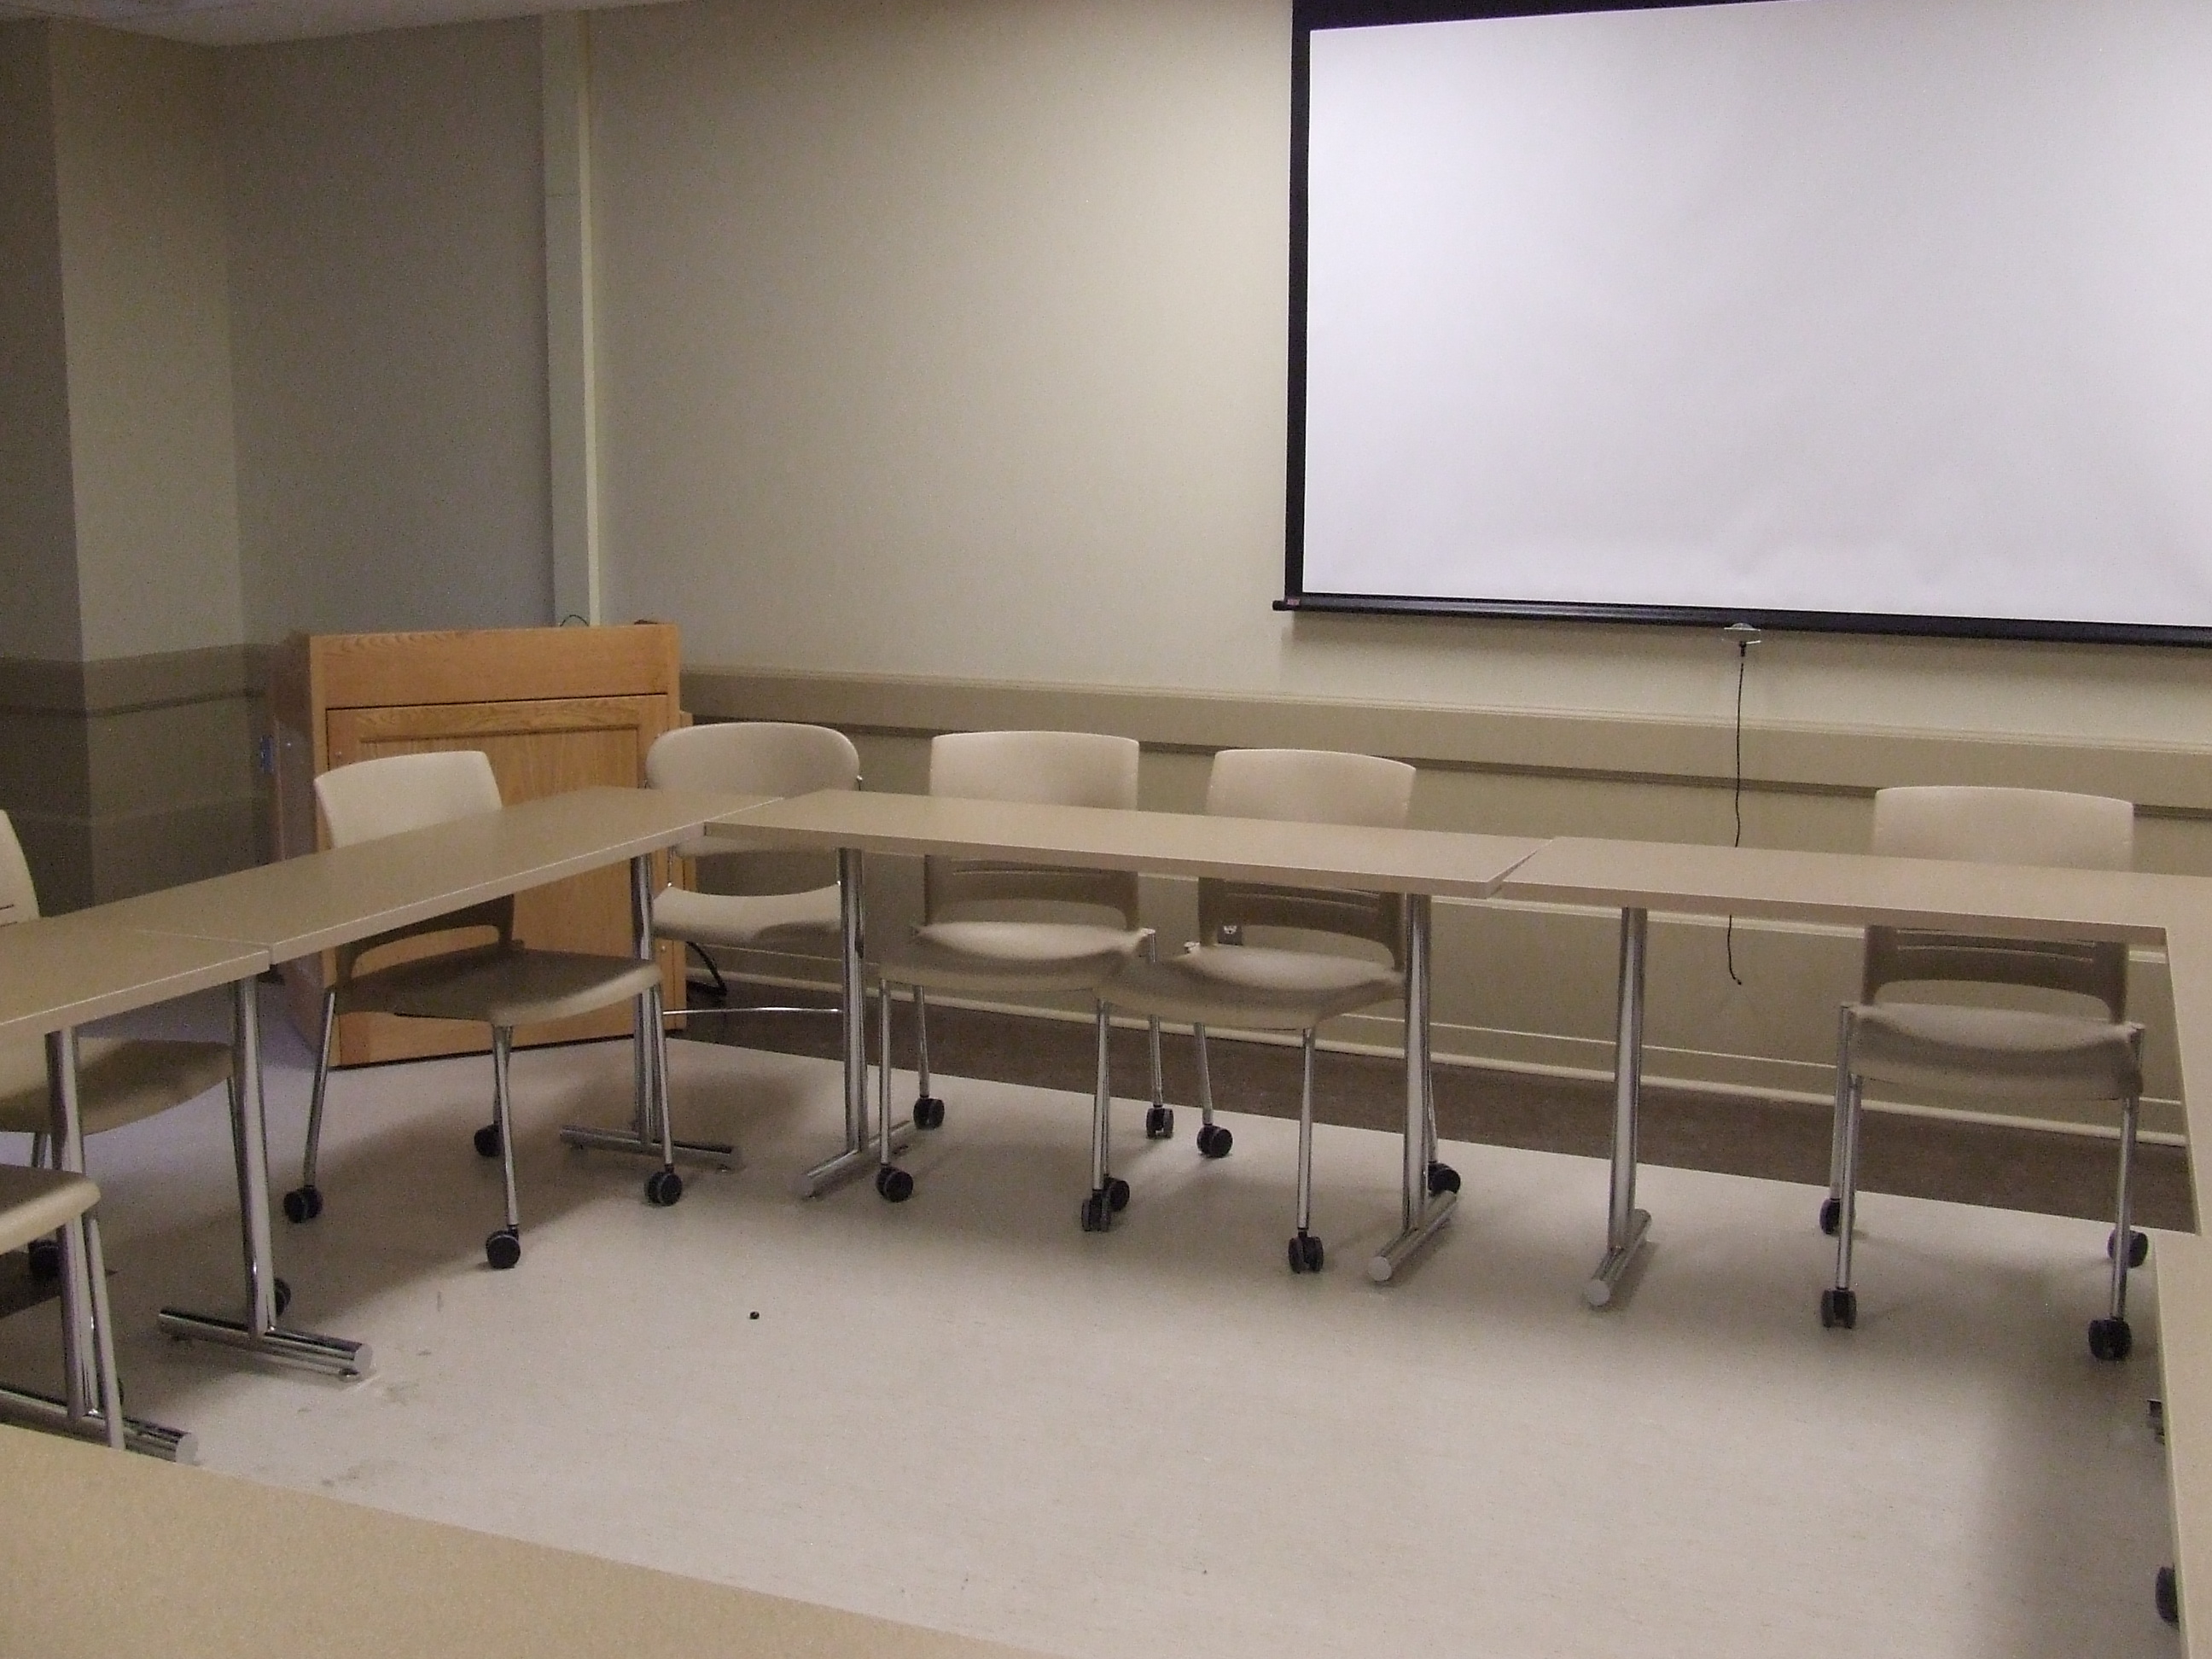 A view of the classroom with movable tables and chairs and instructor table in front.